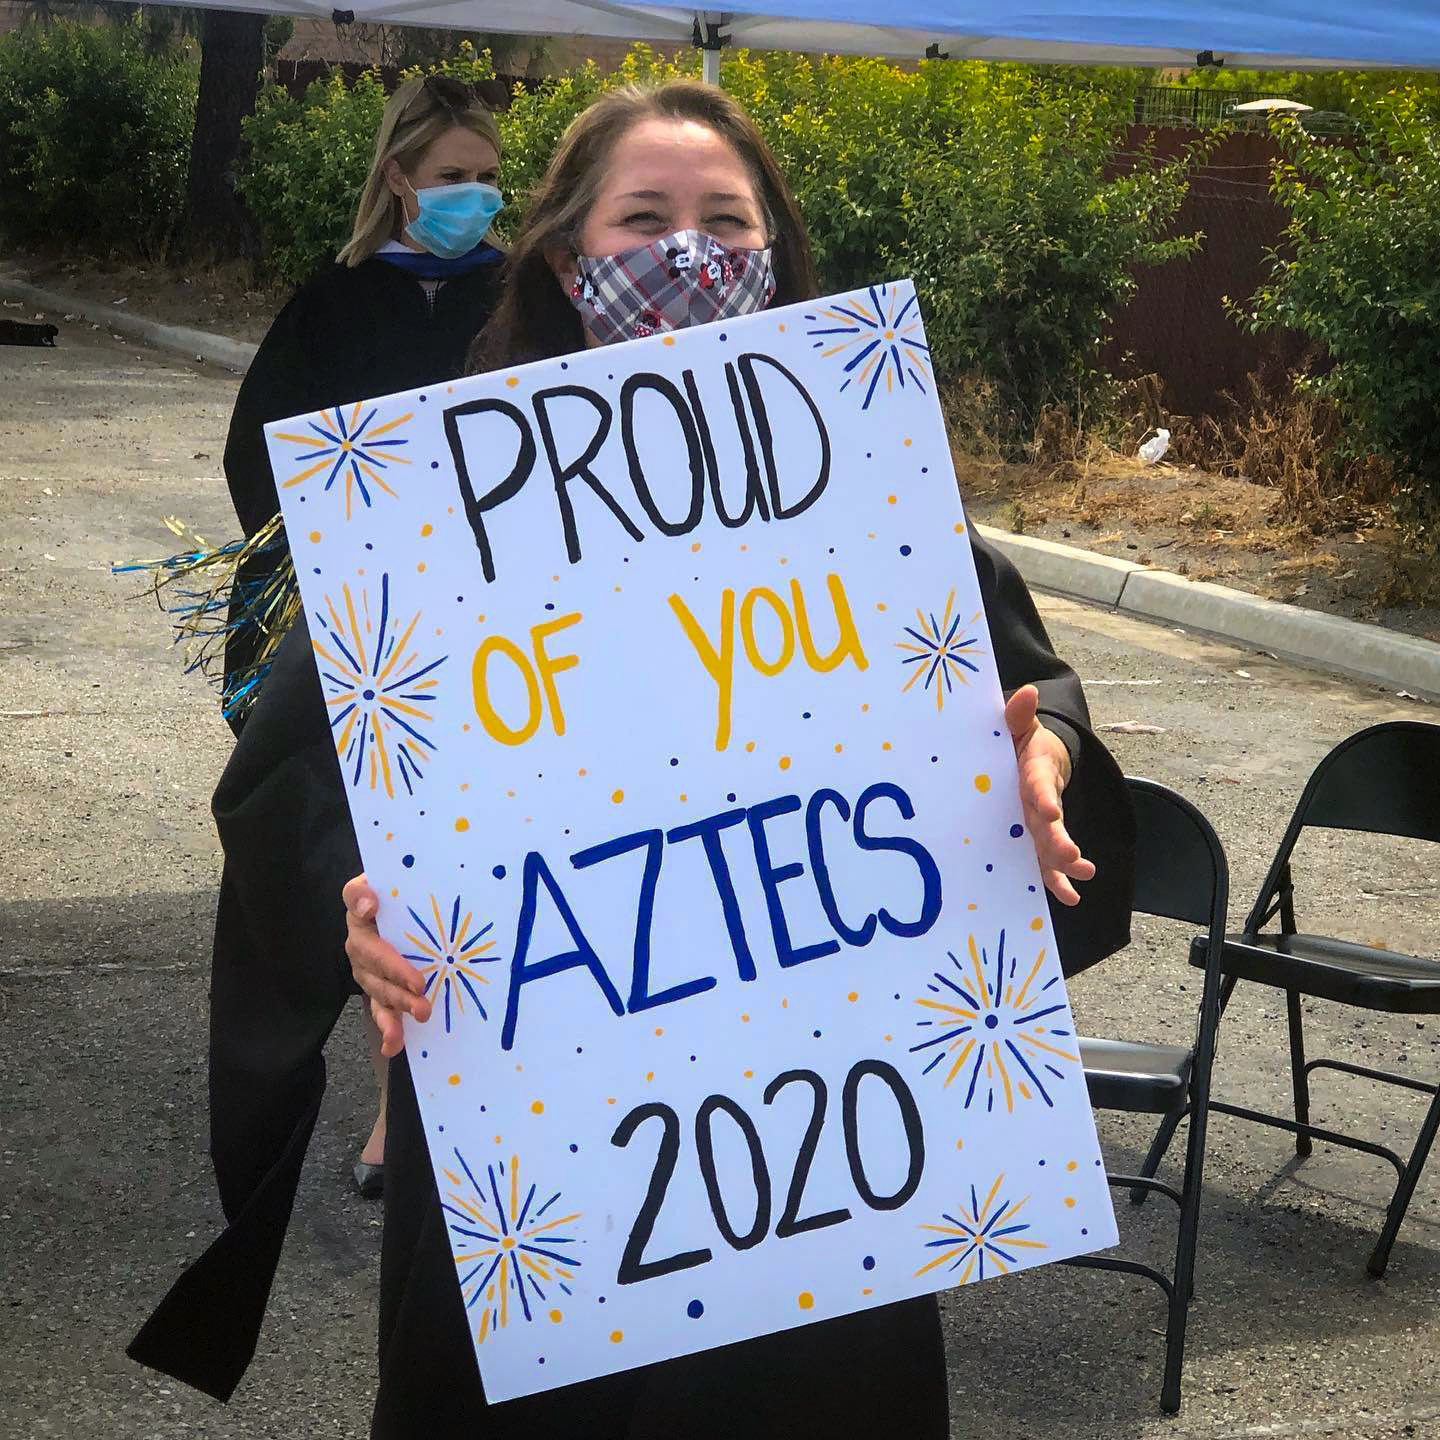 Woman in mask holds sign reading "Proud of you Aztecs 2020"